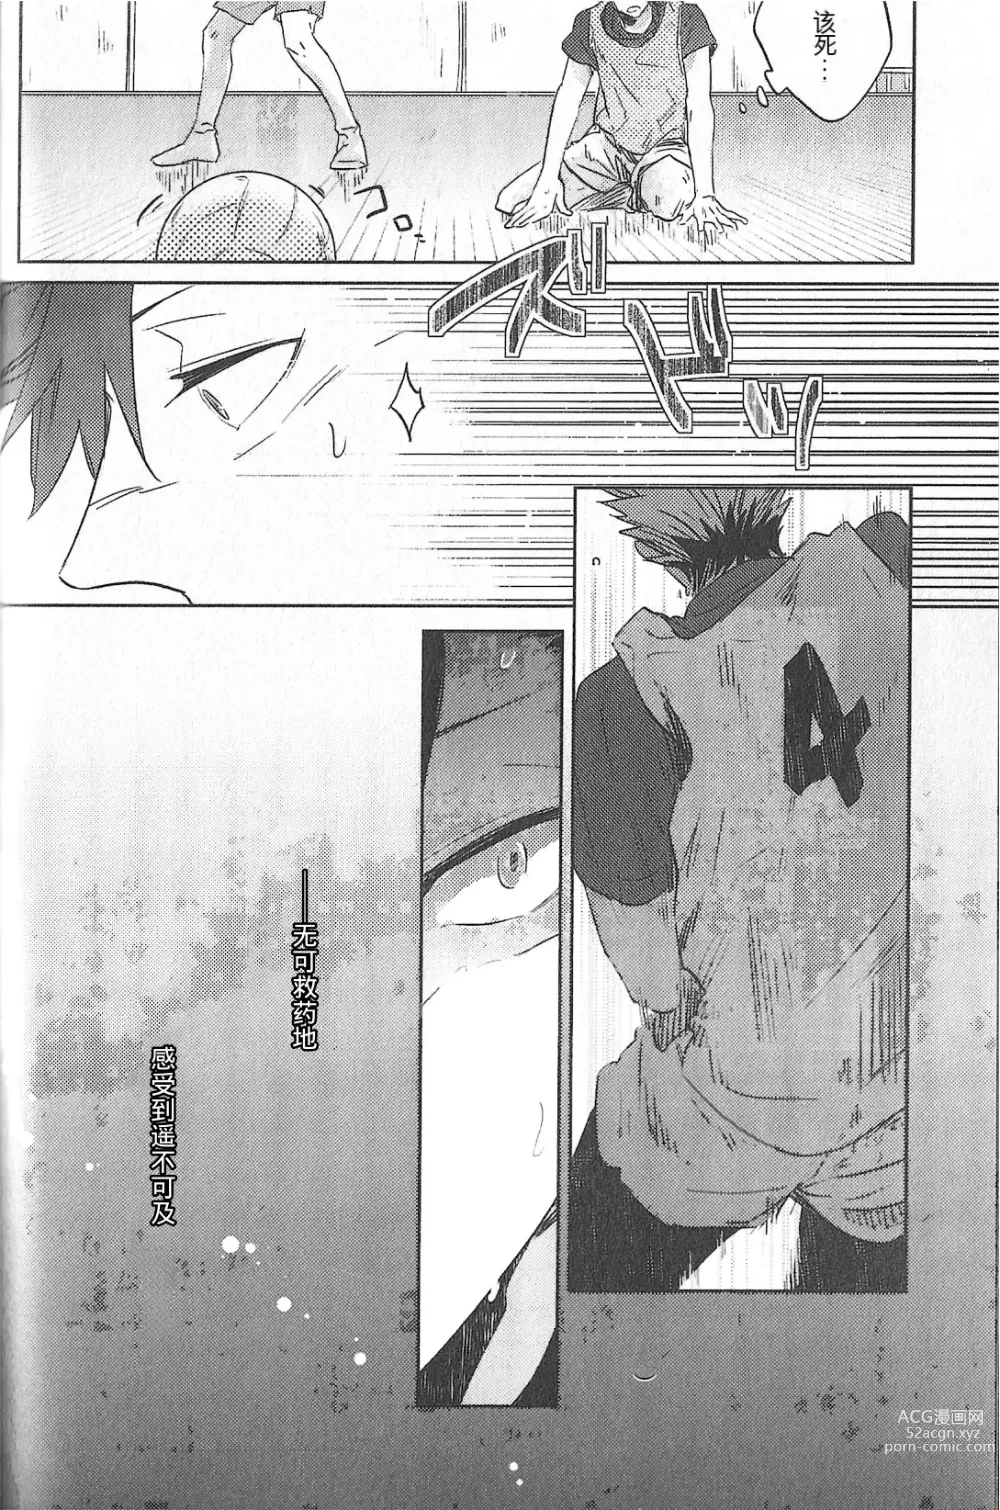 Page 3 of doujinshi 极境的野兽 后篇